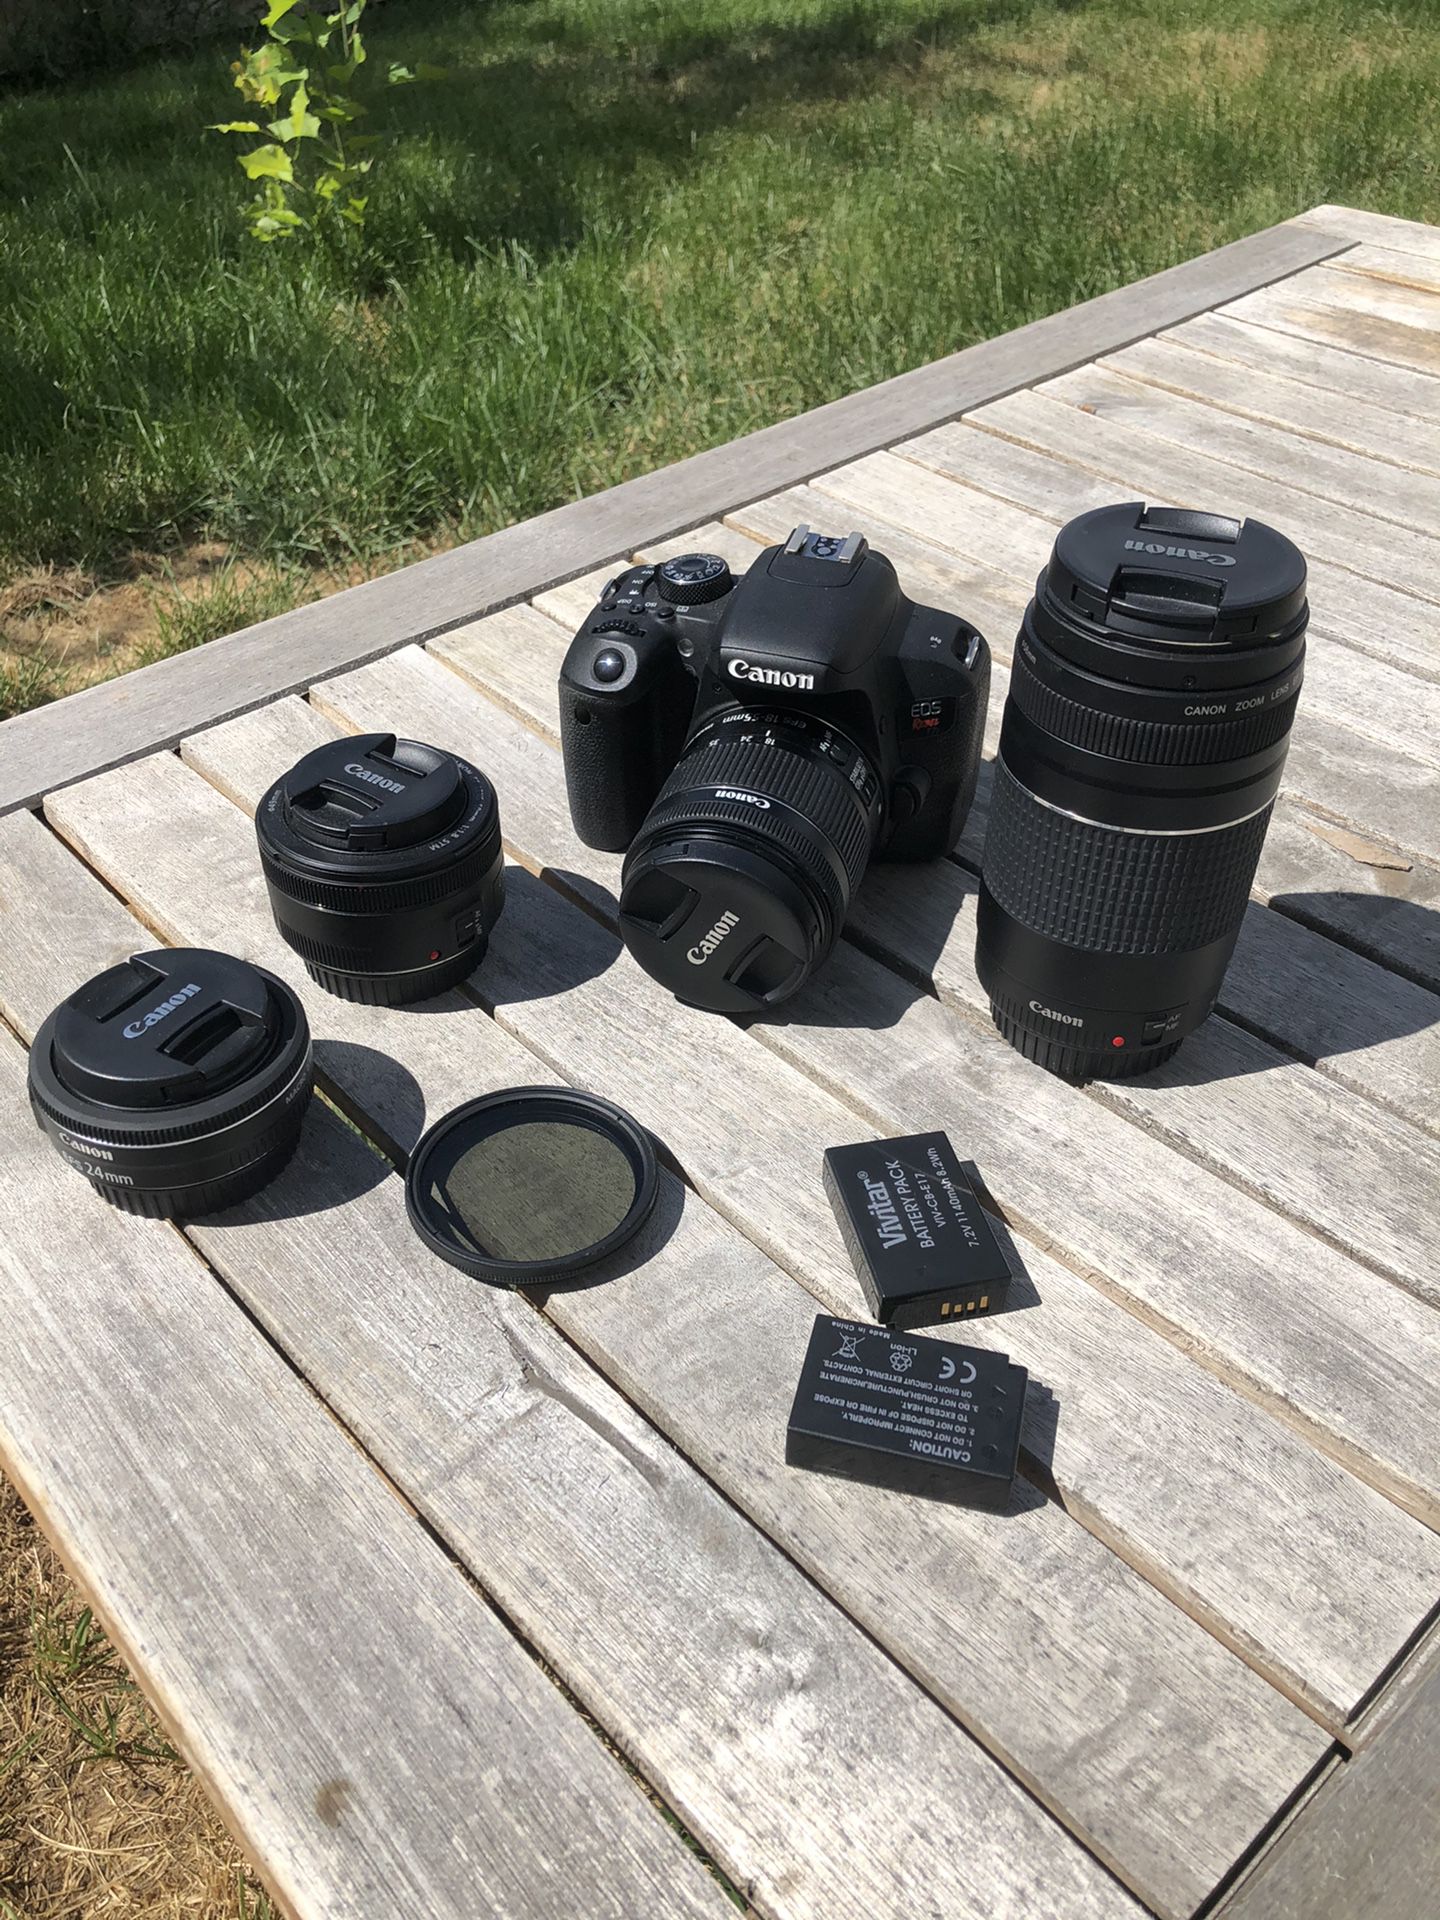 PRICE NEGOTIABLE! Canon Rebel t6i (barely used) + 4 lenses + 3 batteries